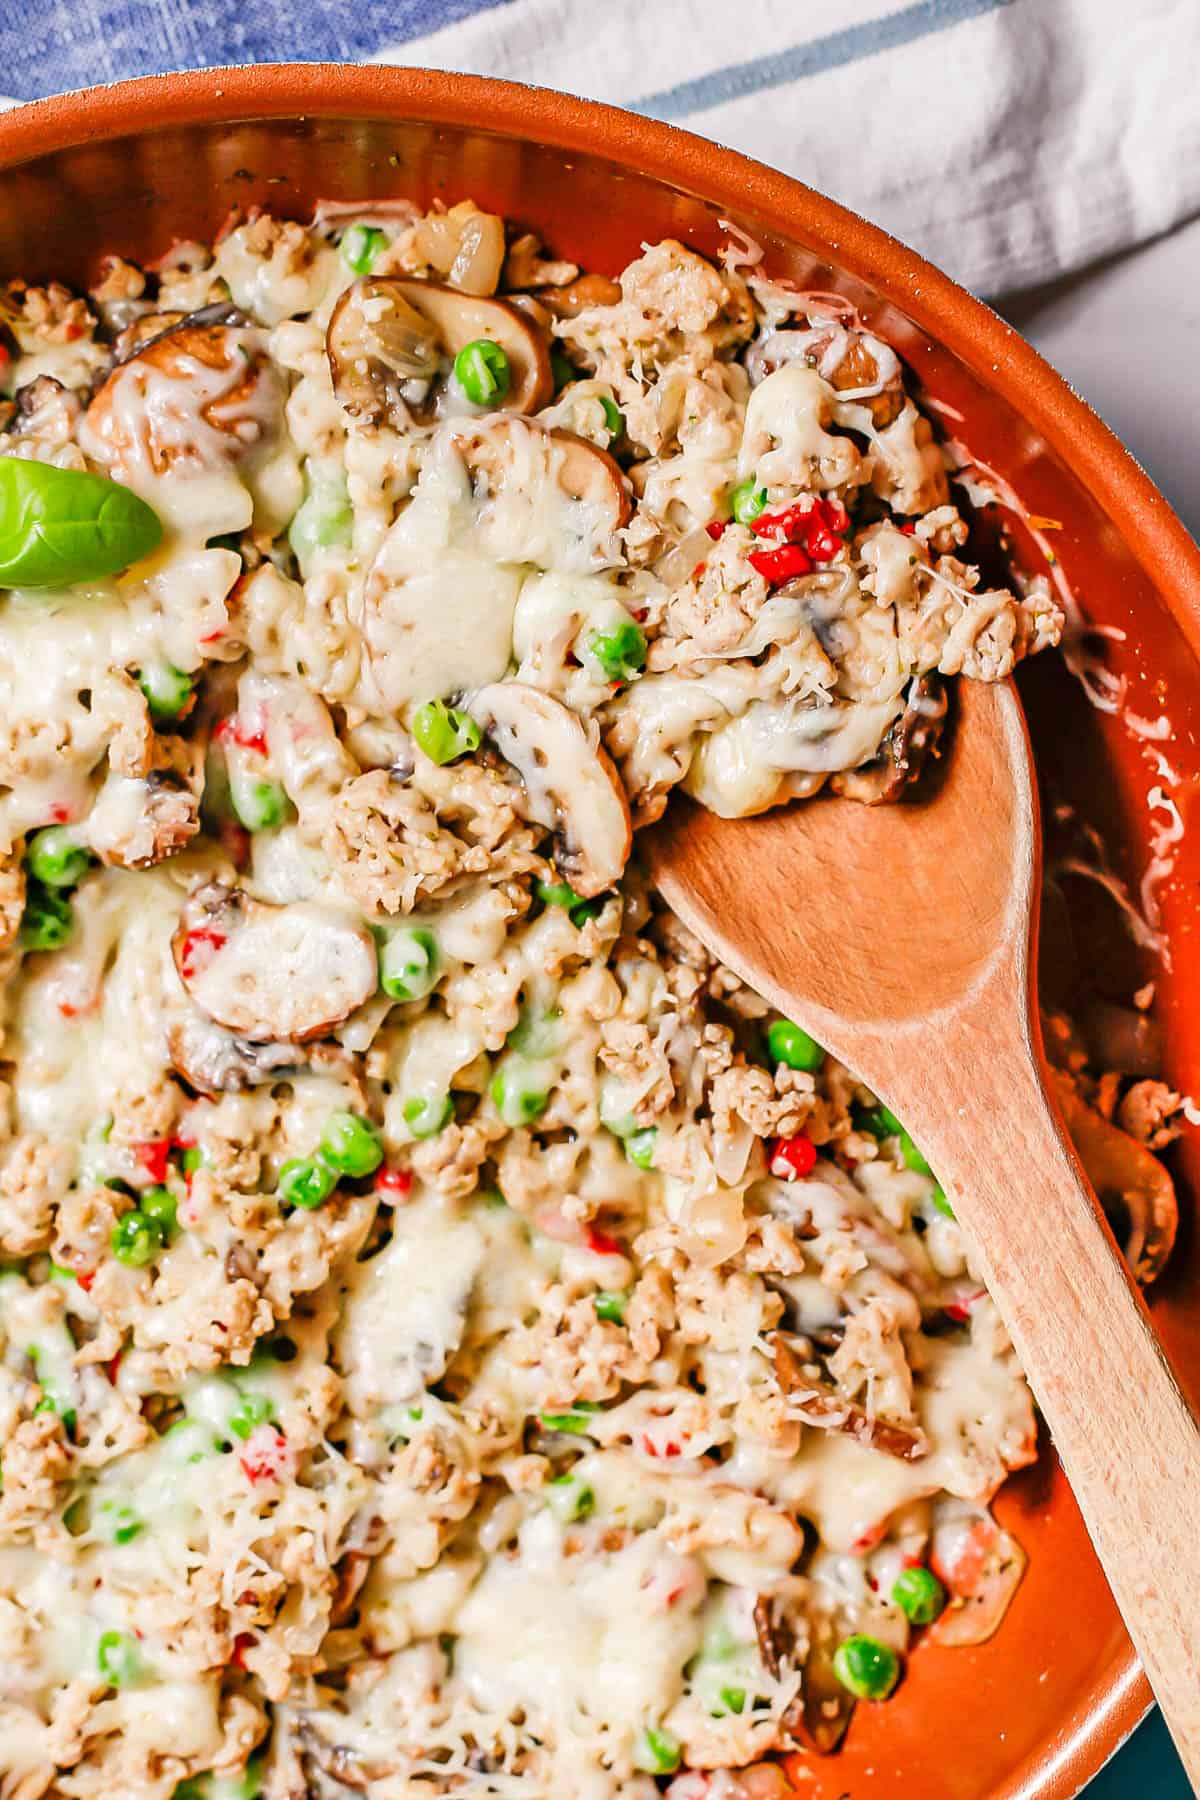 A wooden spoon resting in a copper skillet with a mixture of ground chicken, mushrooms and peas topped with cheese.